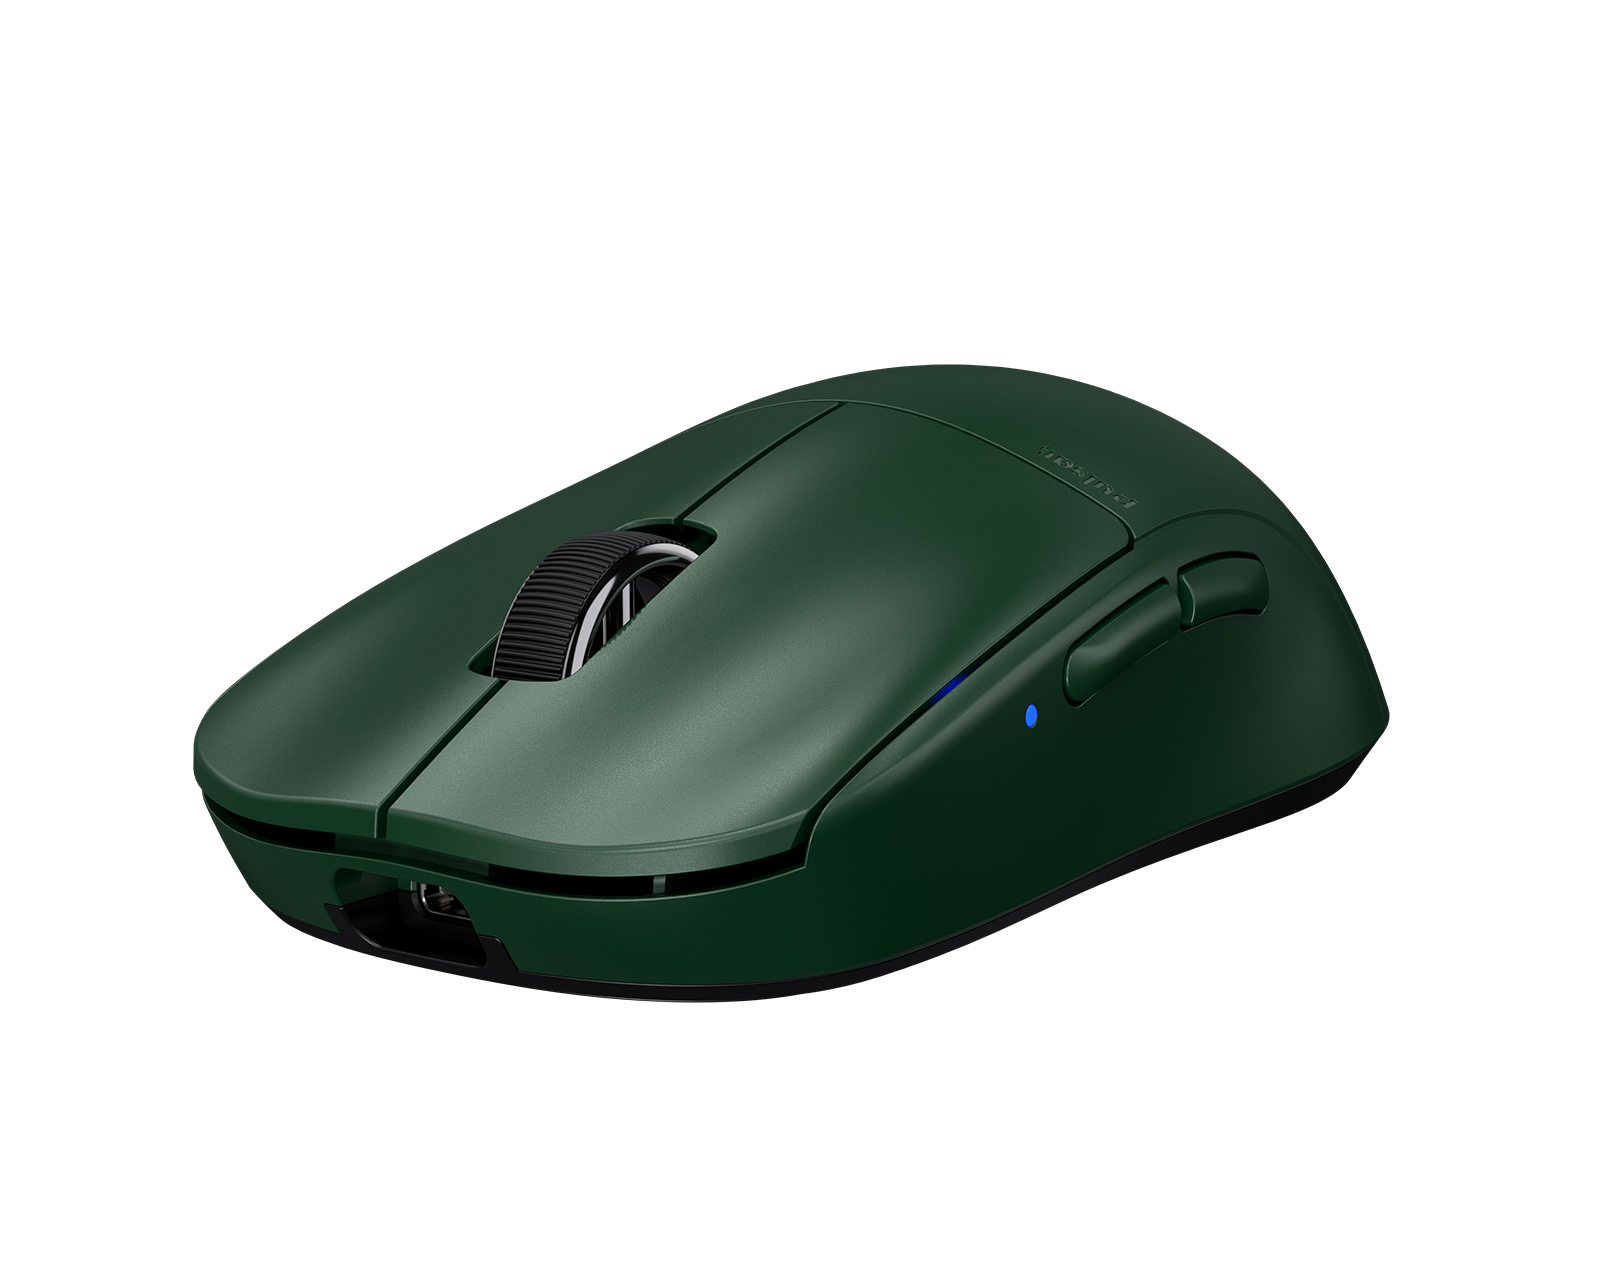 Pulsar X2 Mini Wireless Gaming Mouse - Green - Founder's Edition